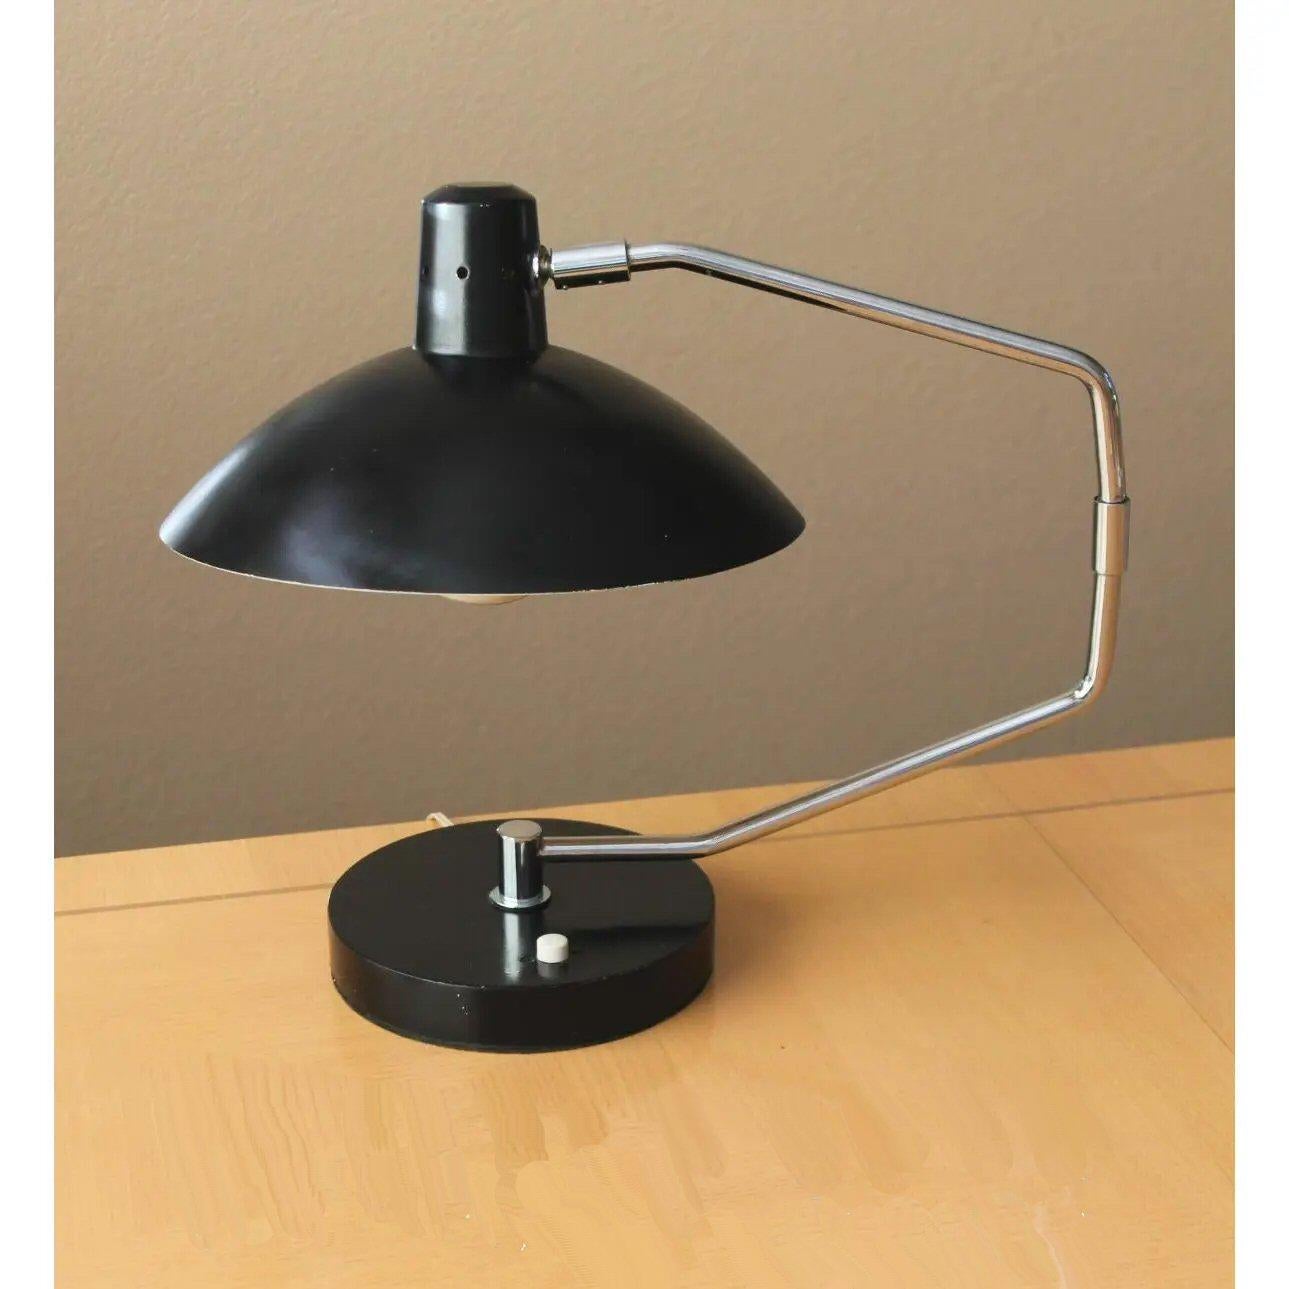 Clay Michie For Knoll Swing Arm Saucer Desk Lamp, 1950s Mid Century Good Design In Good Condition For Sale In Peoria, AZ